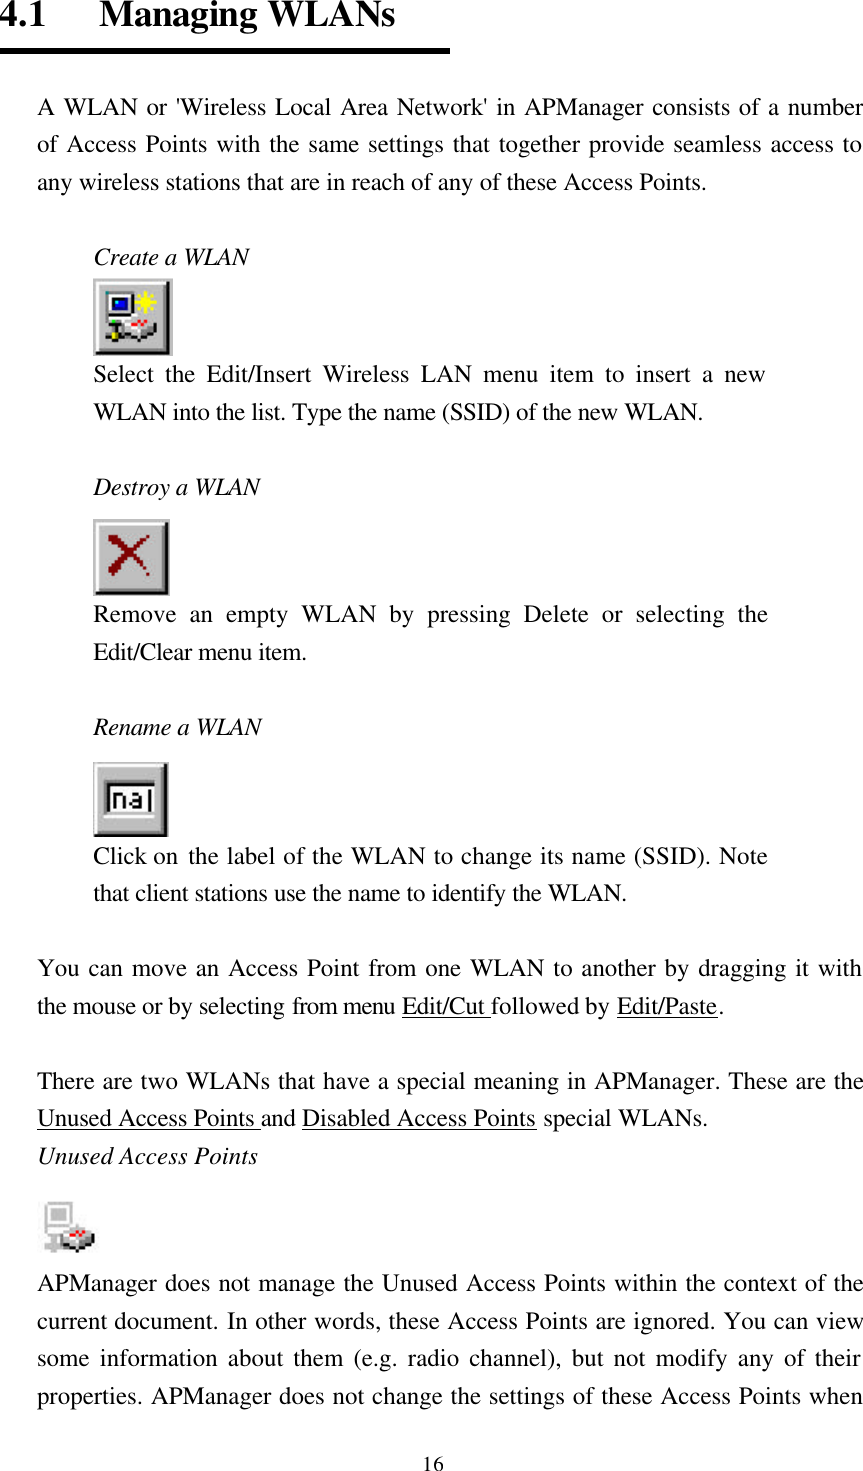  164.1   Managing WLANs  A WLAN or &apos;Wireless Local Area Network&apos; in APManager consists of a number of Access Points with the same settings that together provide seamless access to any wireless stations that are in reach of any of these Access Points.      Create a WLAN Select the Edit/Insert Wireless LAN menu item to insert a new WLAN into the list. Type the name (SSID) of the new WLAN.  Destroy a WLAN   Remove an empty WLAN by pressing Delete or selecting the Edit/Clear menu item.  Rename a WLAN Click on the label of the WLAN to change its name (SSID). Note that client stations use the name to identify the WLAN.  You can move an Access Point from one WLAN to another by dragging it with the mouse or by selecting from menu Edit/Cut followed by Edit/Paste.  There are two WLANs that have a special meaning in APManager. These are the Unused Access Points and Disabled Access Points special WLANs. Unused Access Points   APManager does not manage the Unused Access Points within the context of the current document. In other words, these Access Points are ignored. You can view some information about them (e.g. radio channel), but not modify any of their properties. APManager does not change the settings of these Access Points when 